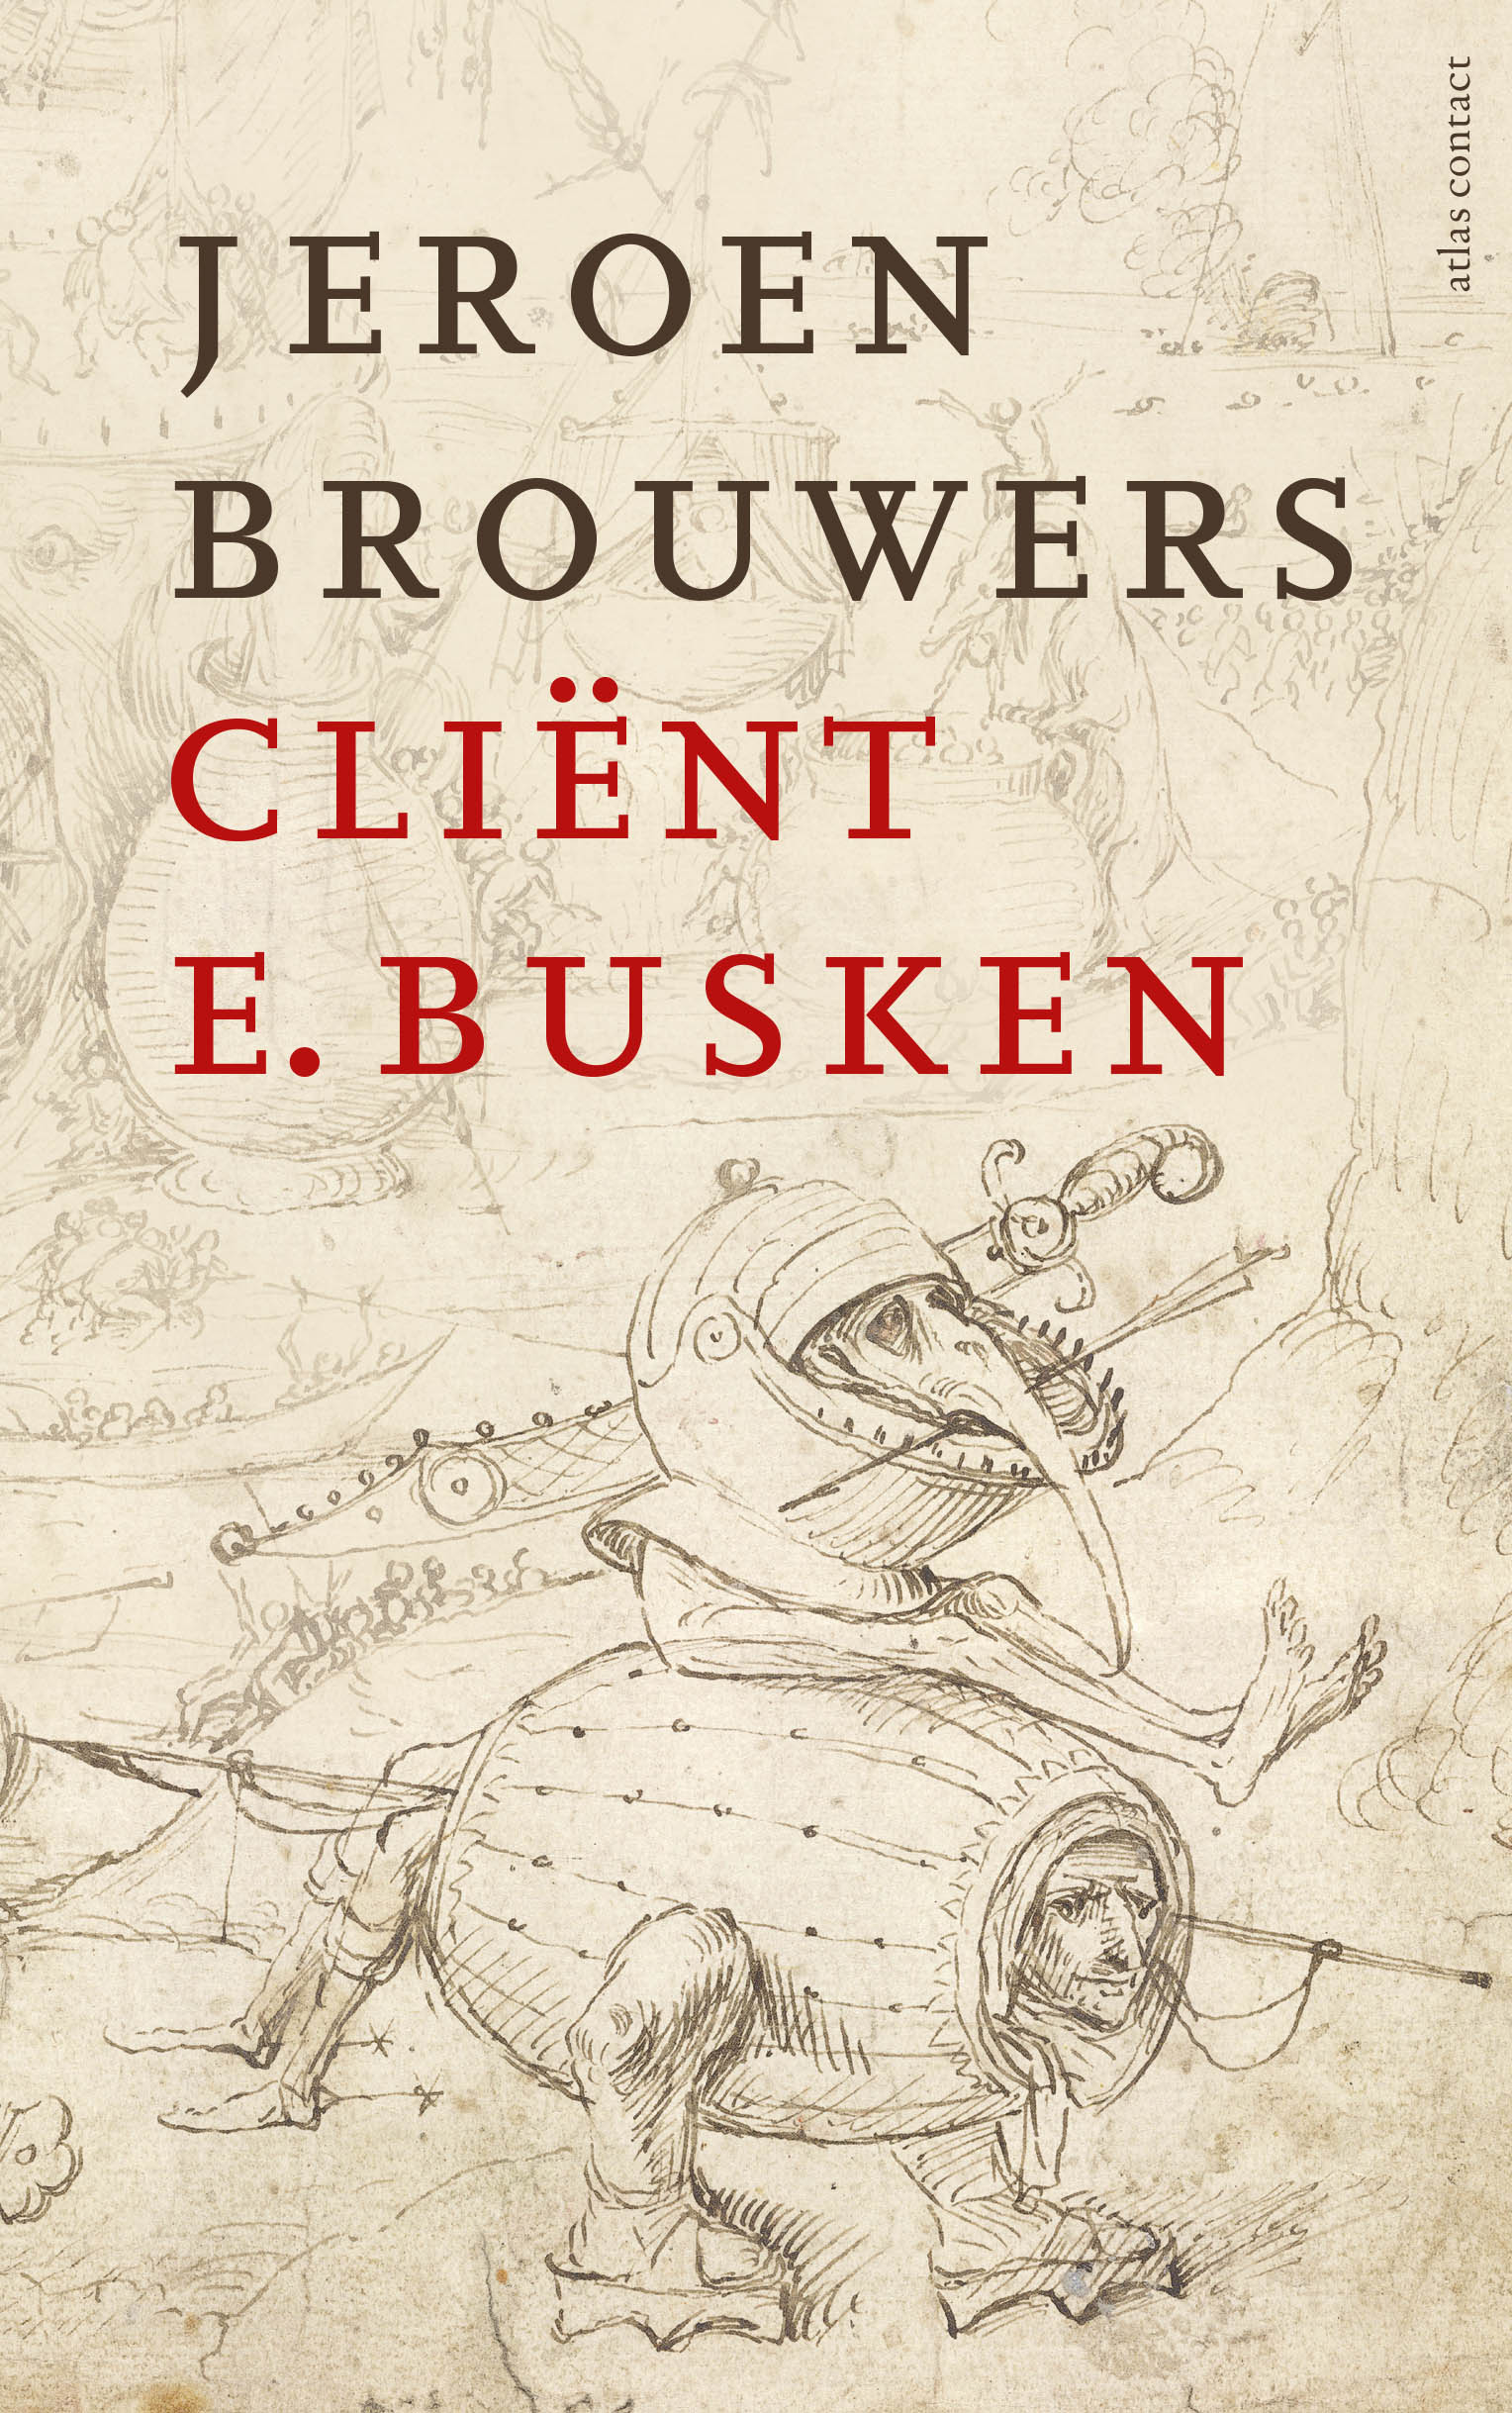 Brouwers-Client Busken@3.indd